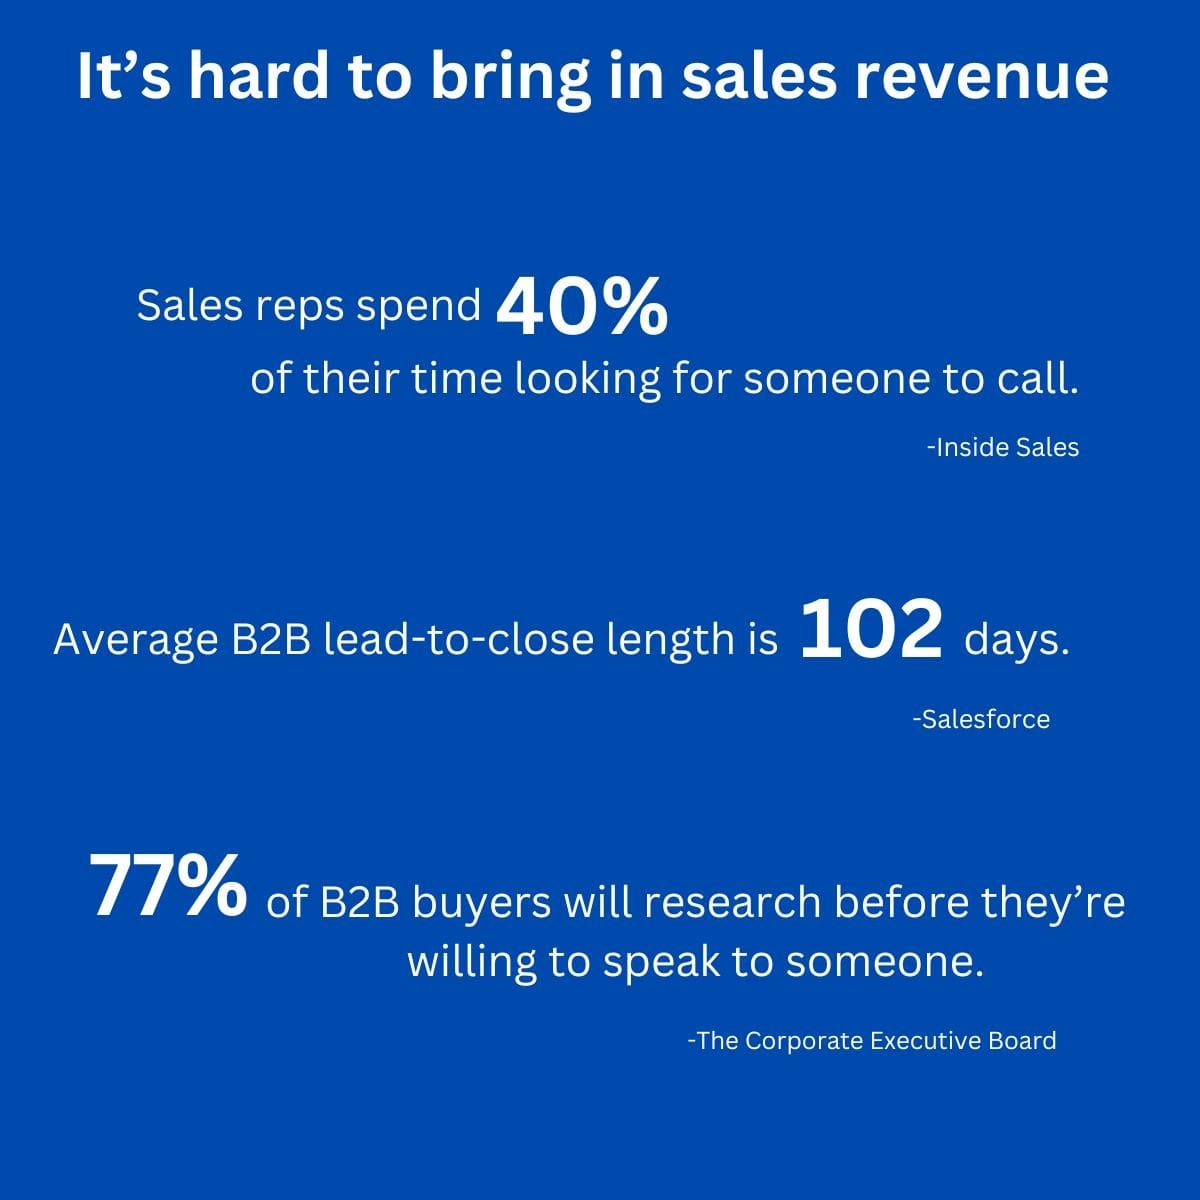 A blue and white graphic with stats about sales reps - such as they spend 40% of their time looking for someone to call.